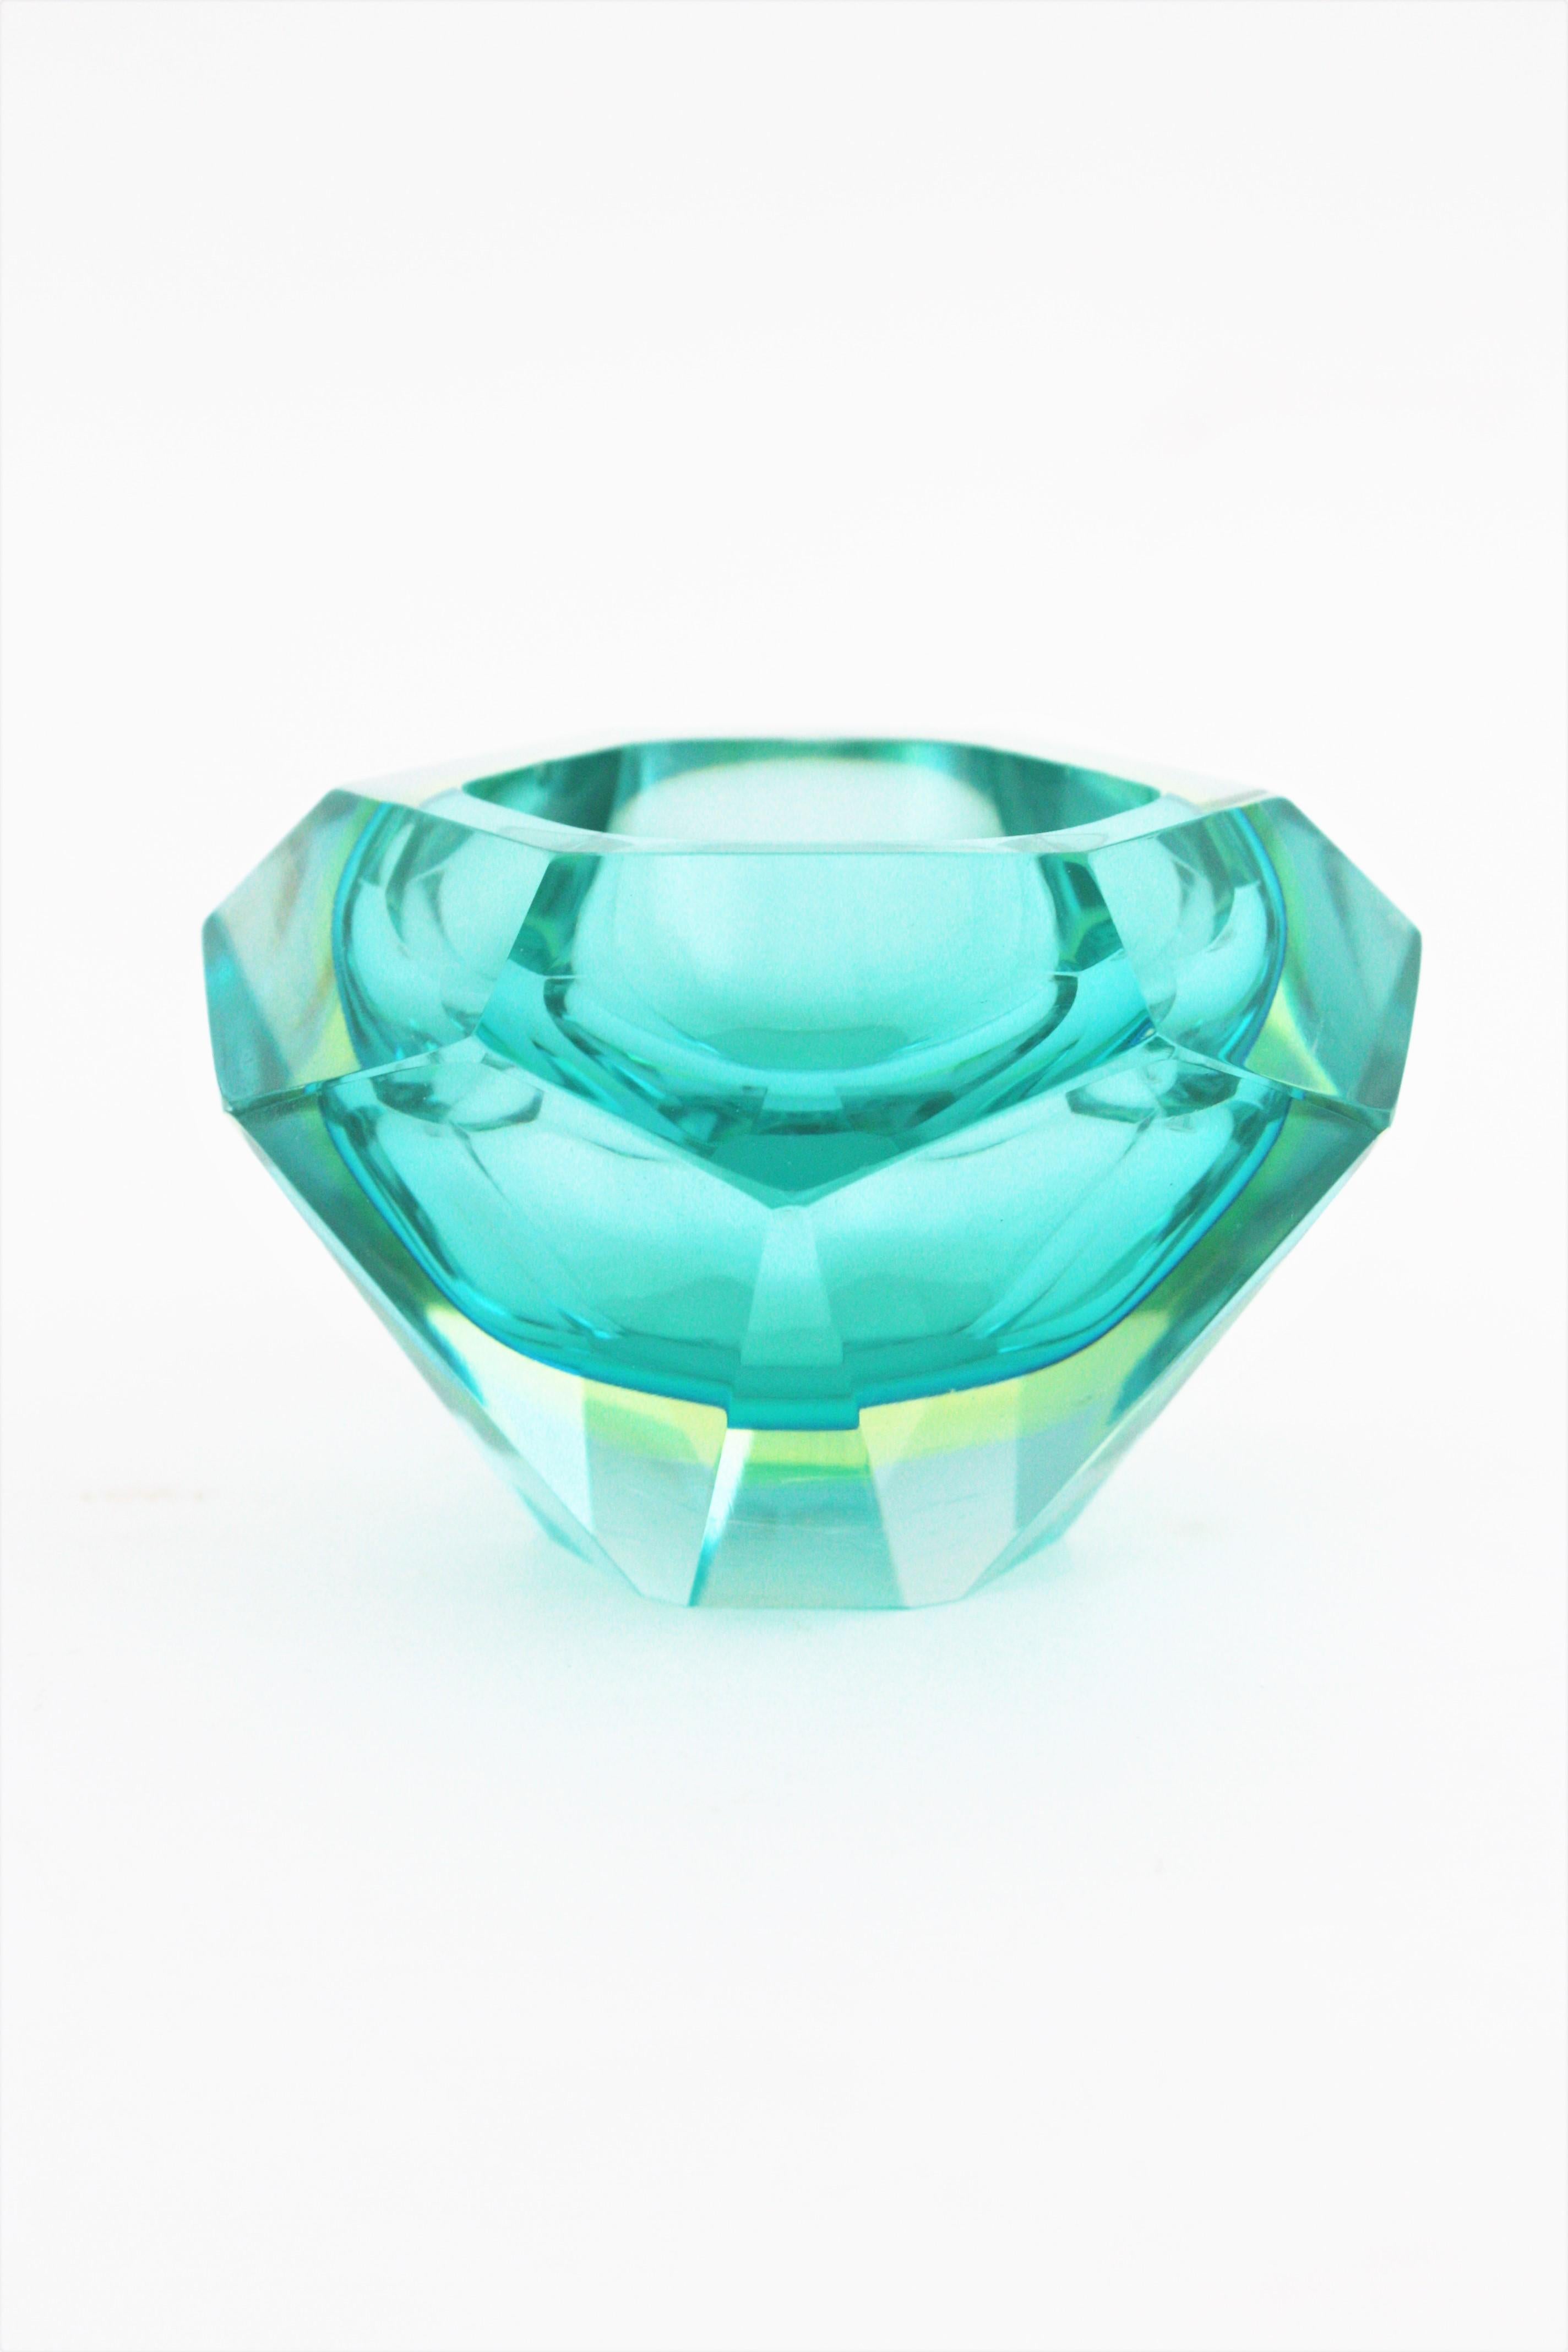 Flavio Poli Sommerso Turquoise Blue Yellow Diamond Faceted Murano Art Glass Bowl For Sale 2